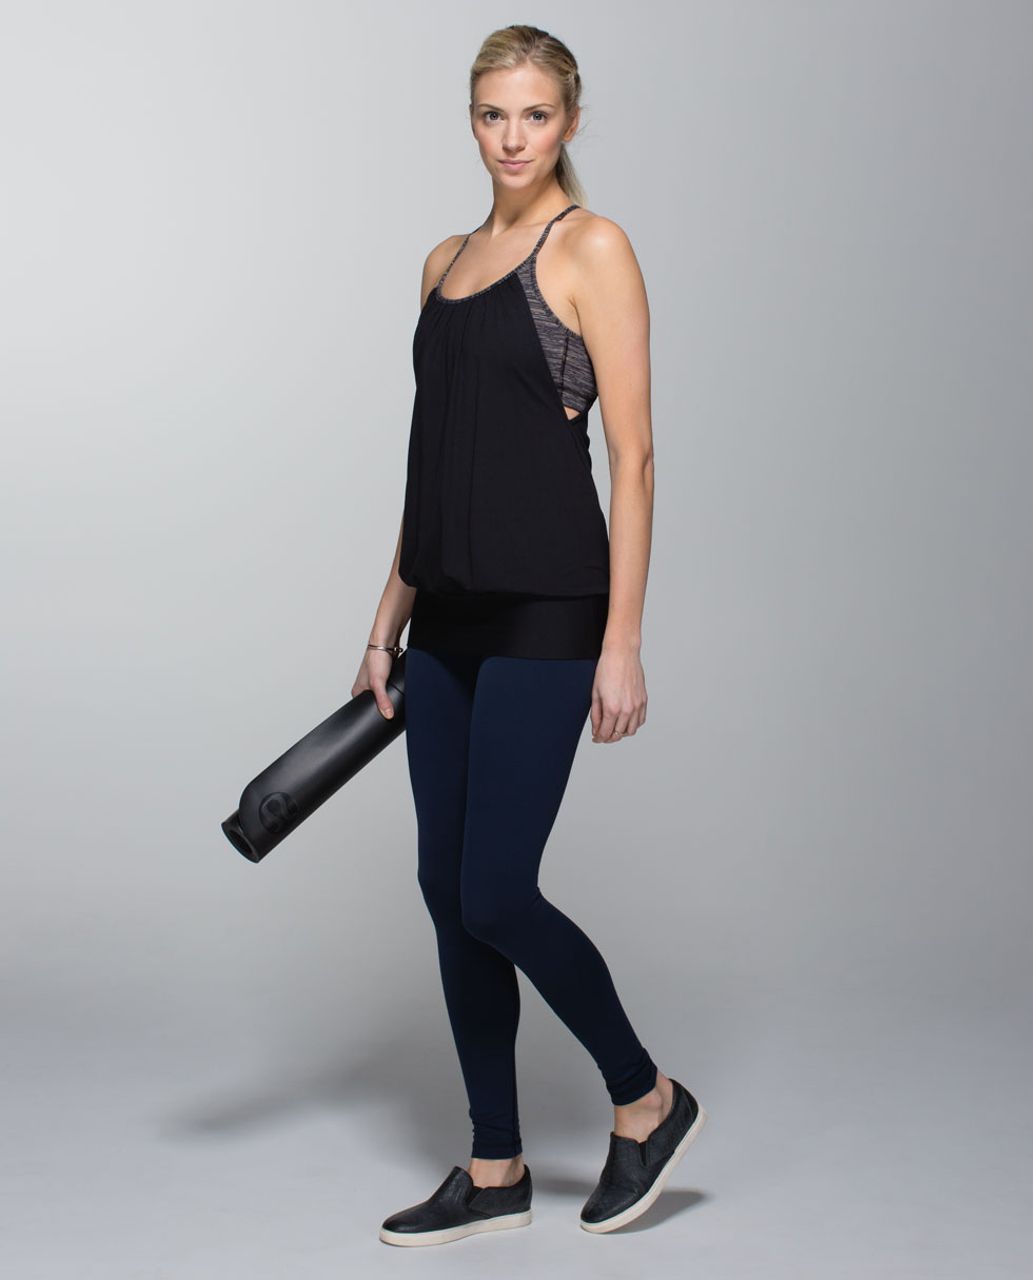 Lululemon No Limits Tank - Black / Wee Are From Space Black Cashew